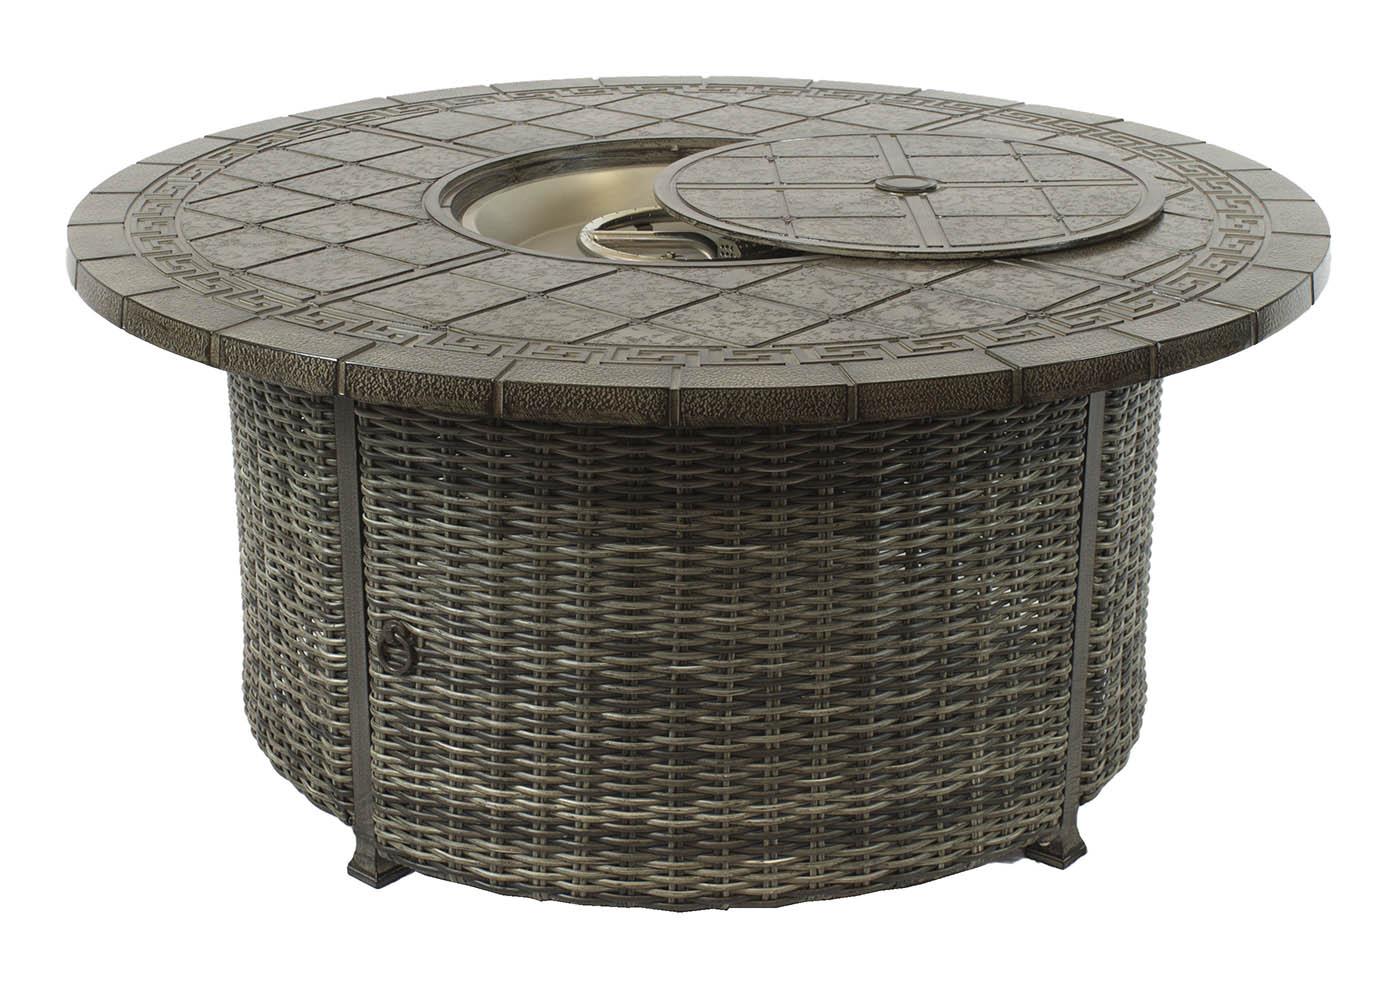 

    
ATDSCS -Set-6 Athena Wicker Fully Welded Curved Circular Sofa Set 6Pcs w/ Firepit Table by CaliPatio SPECIAL ORDER
